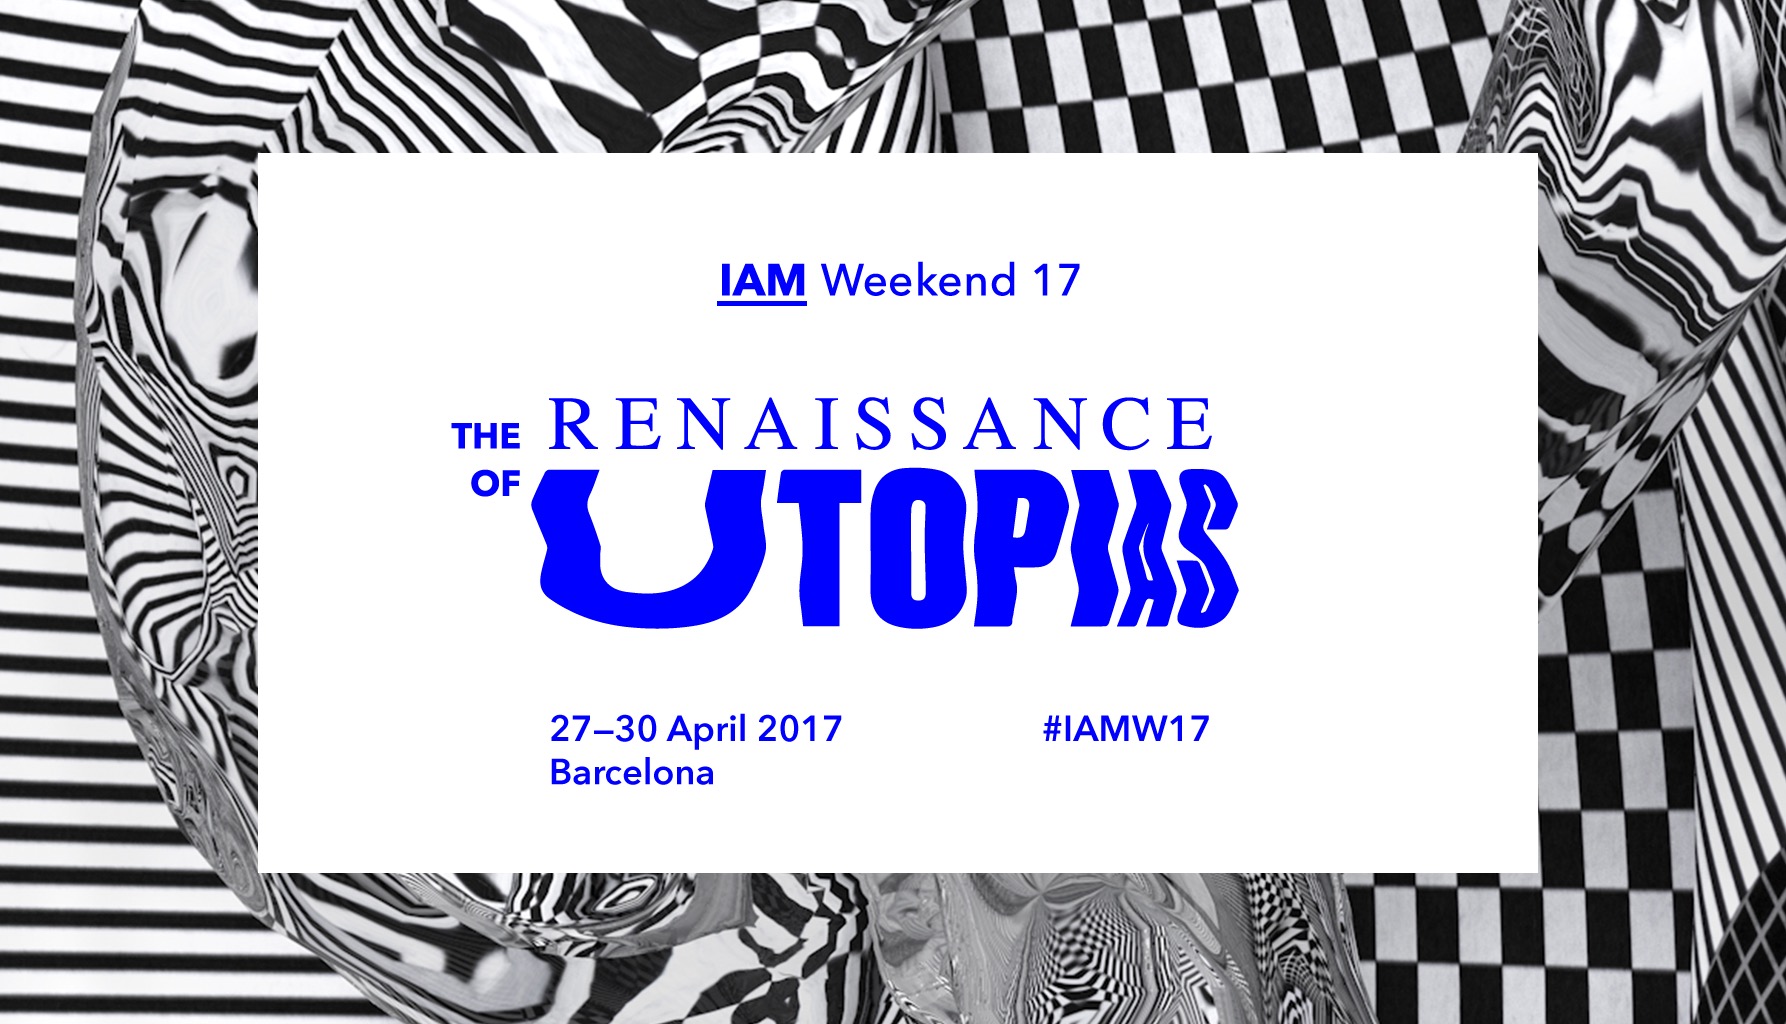 IAM Weekend 17: The Renaissance of Utopias from April 27 to 30 in Barcelona